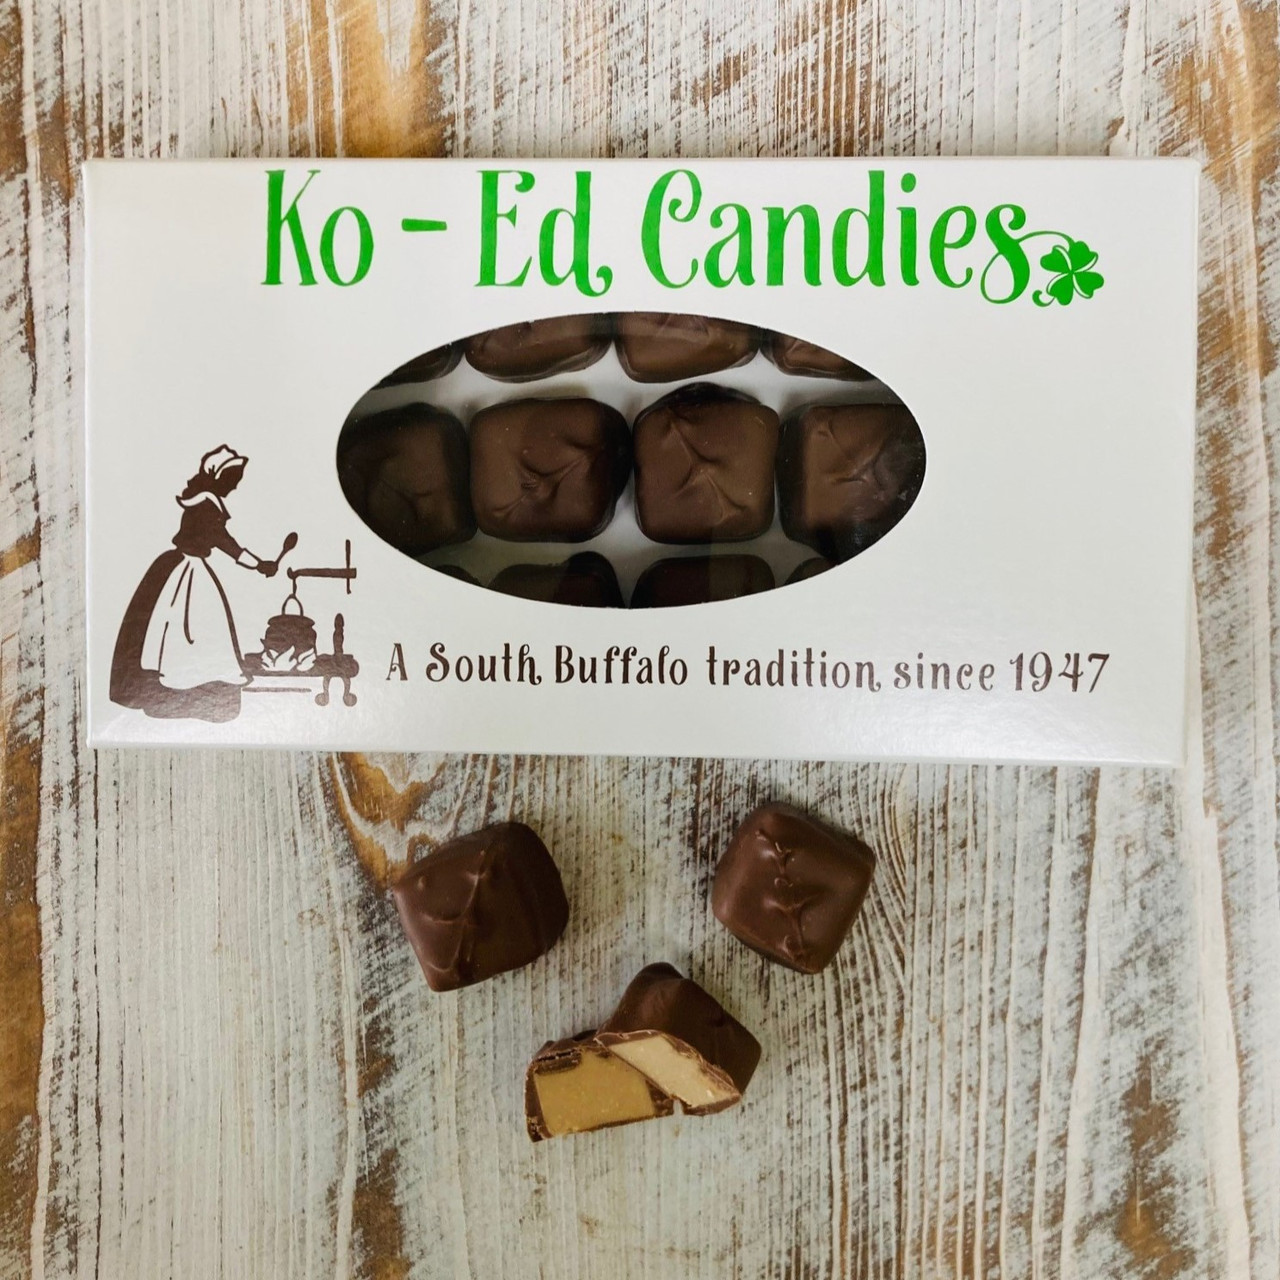 Peanut Butter Smoothie - Ko-Ed Candies South Buffalo